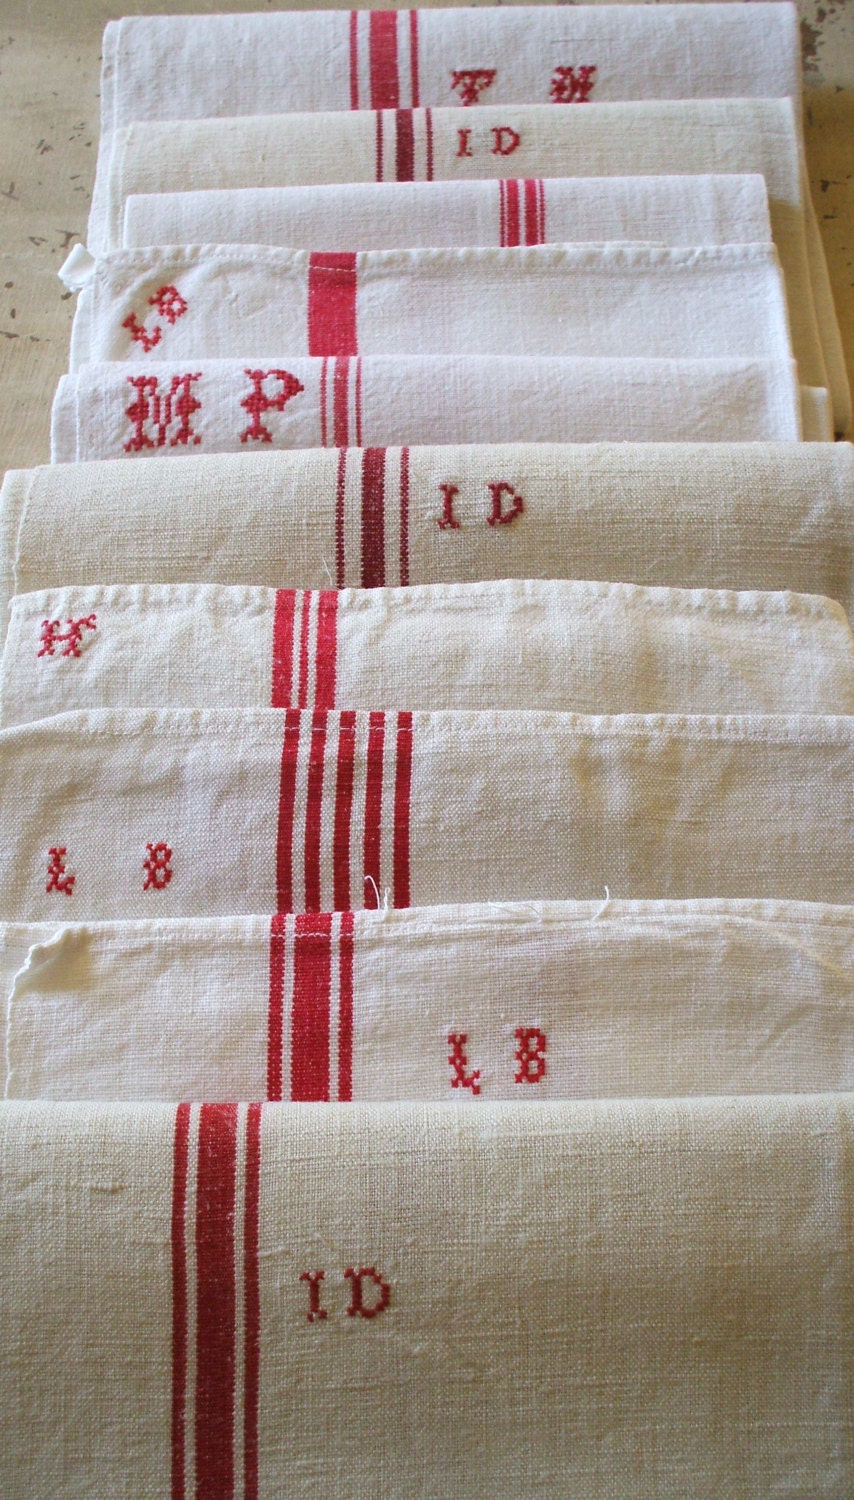 FRENCH LINEN  kitchen cloths red stripe 10 CLOTHS 125 dollars special price  ..linen napkins red linen French torchons - vintagefrenchstyle